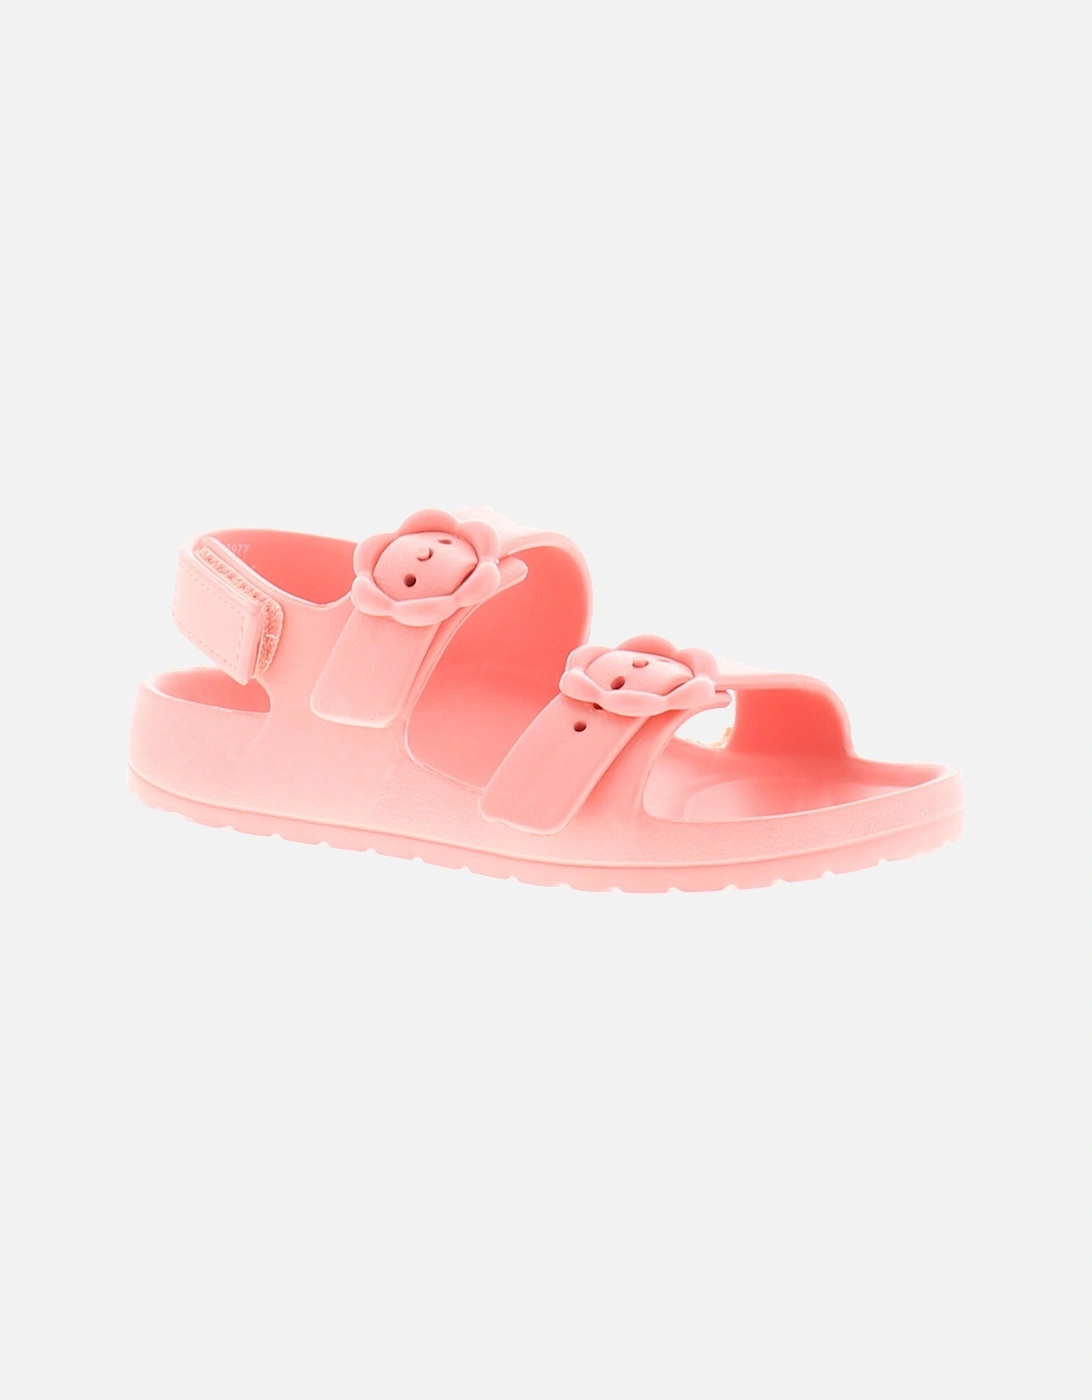 Girls Sandals Infants Besty pink Dual Size UK Size, 6 of 5